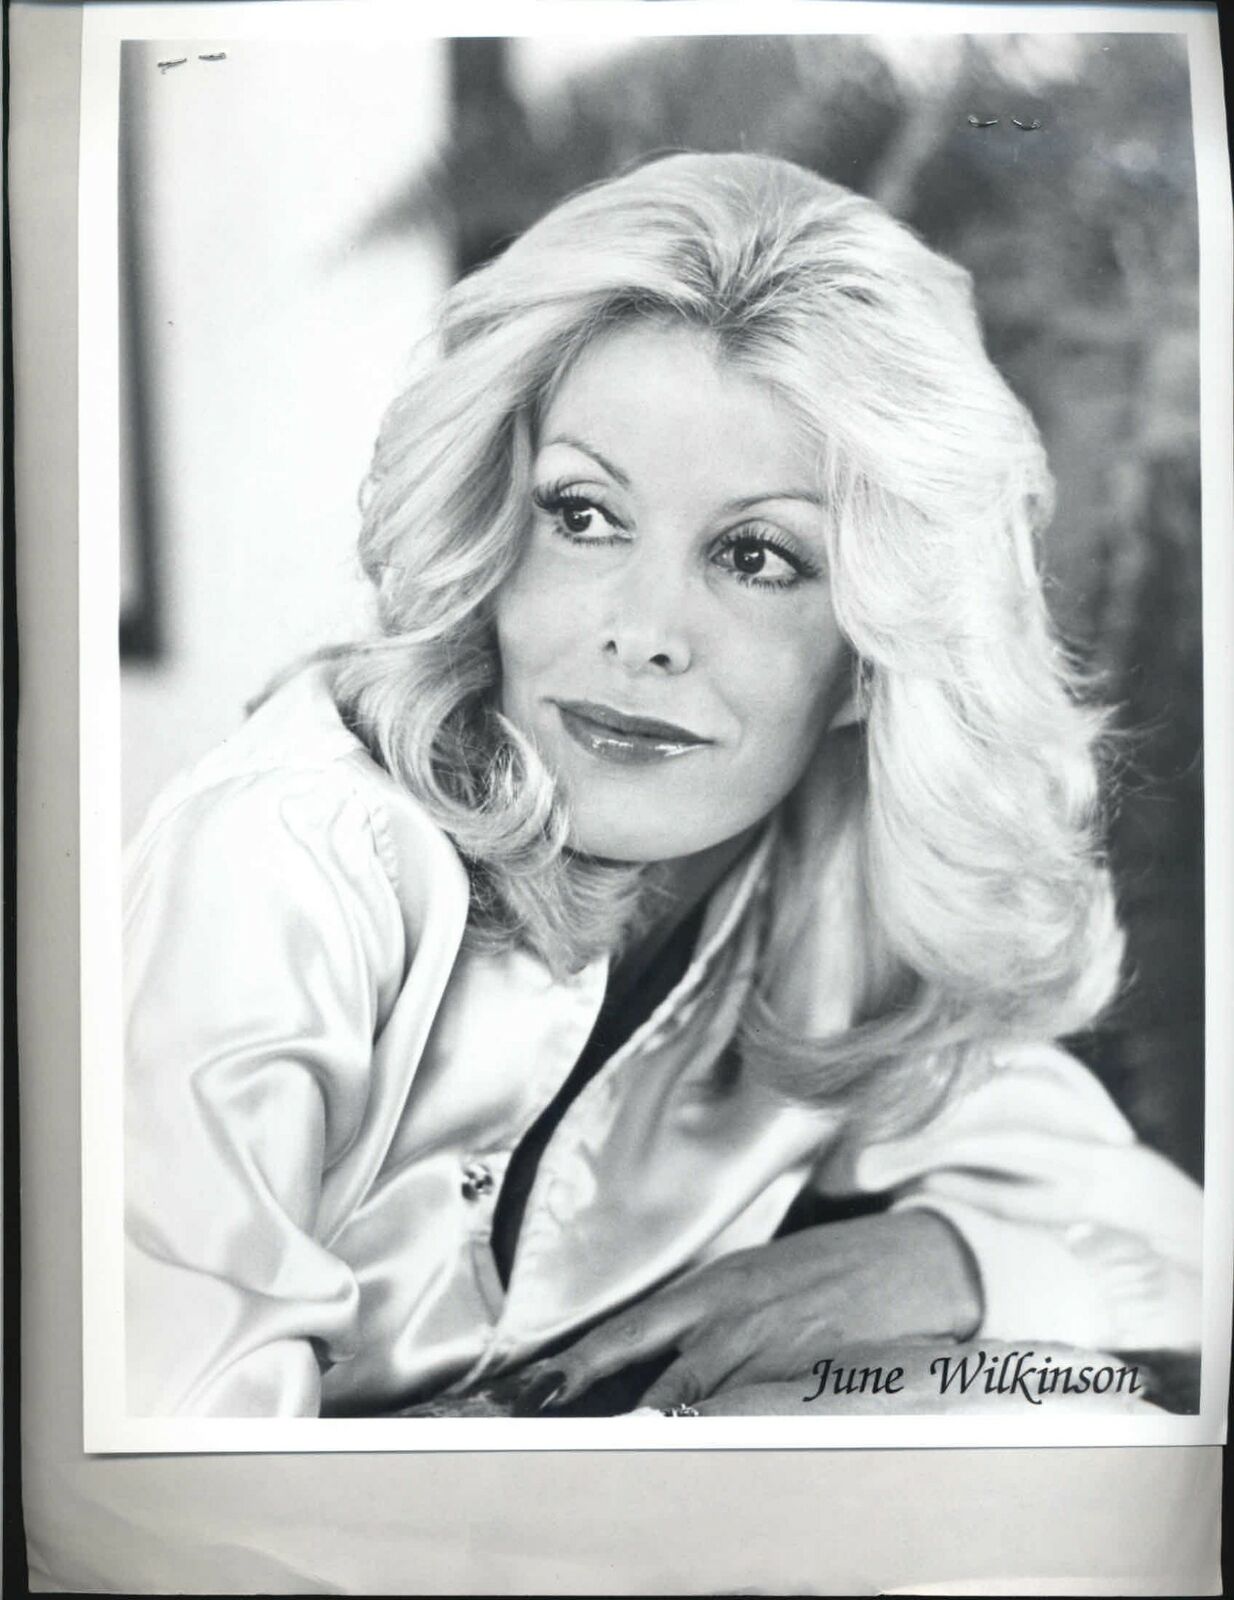 June Wilkinson - 8x10 Headshot Photo Poster painting with Resume - Playboy Playmate